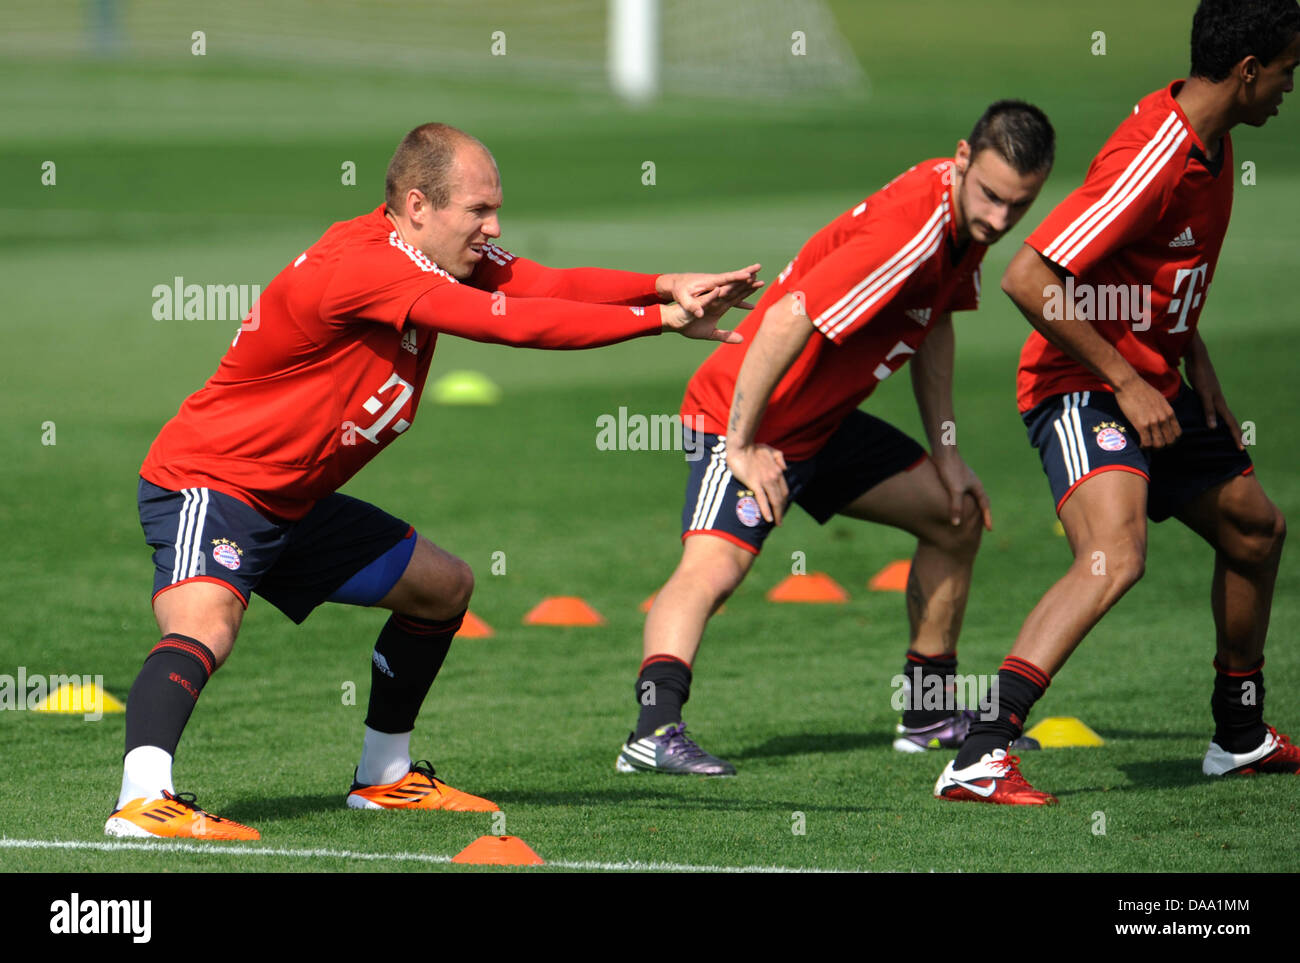 FC Bayern Munich's Arjen Robben (L-R), Diego Contento and Luiz Gustavo practice at a training camp in Doha, Qatar, 05 January 2011. FC Bayern Munich prepares for the second half of the season 2010/2011 with a training camp that takes place between 02 and 09 January in Qatar. Photo: Andreas Gebert Stock Photo